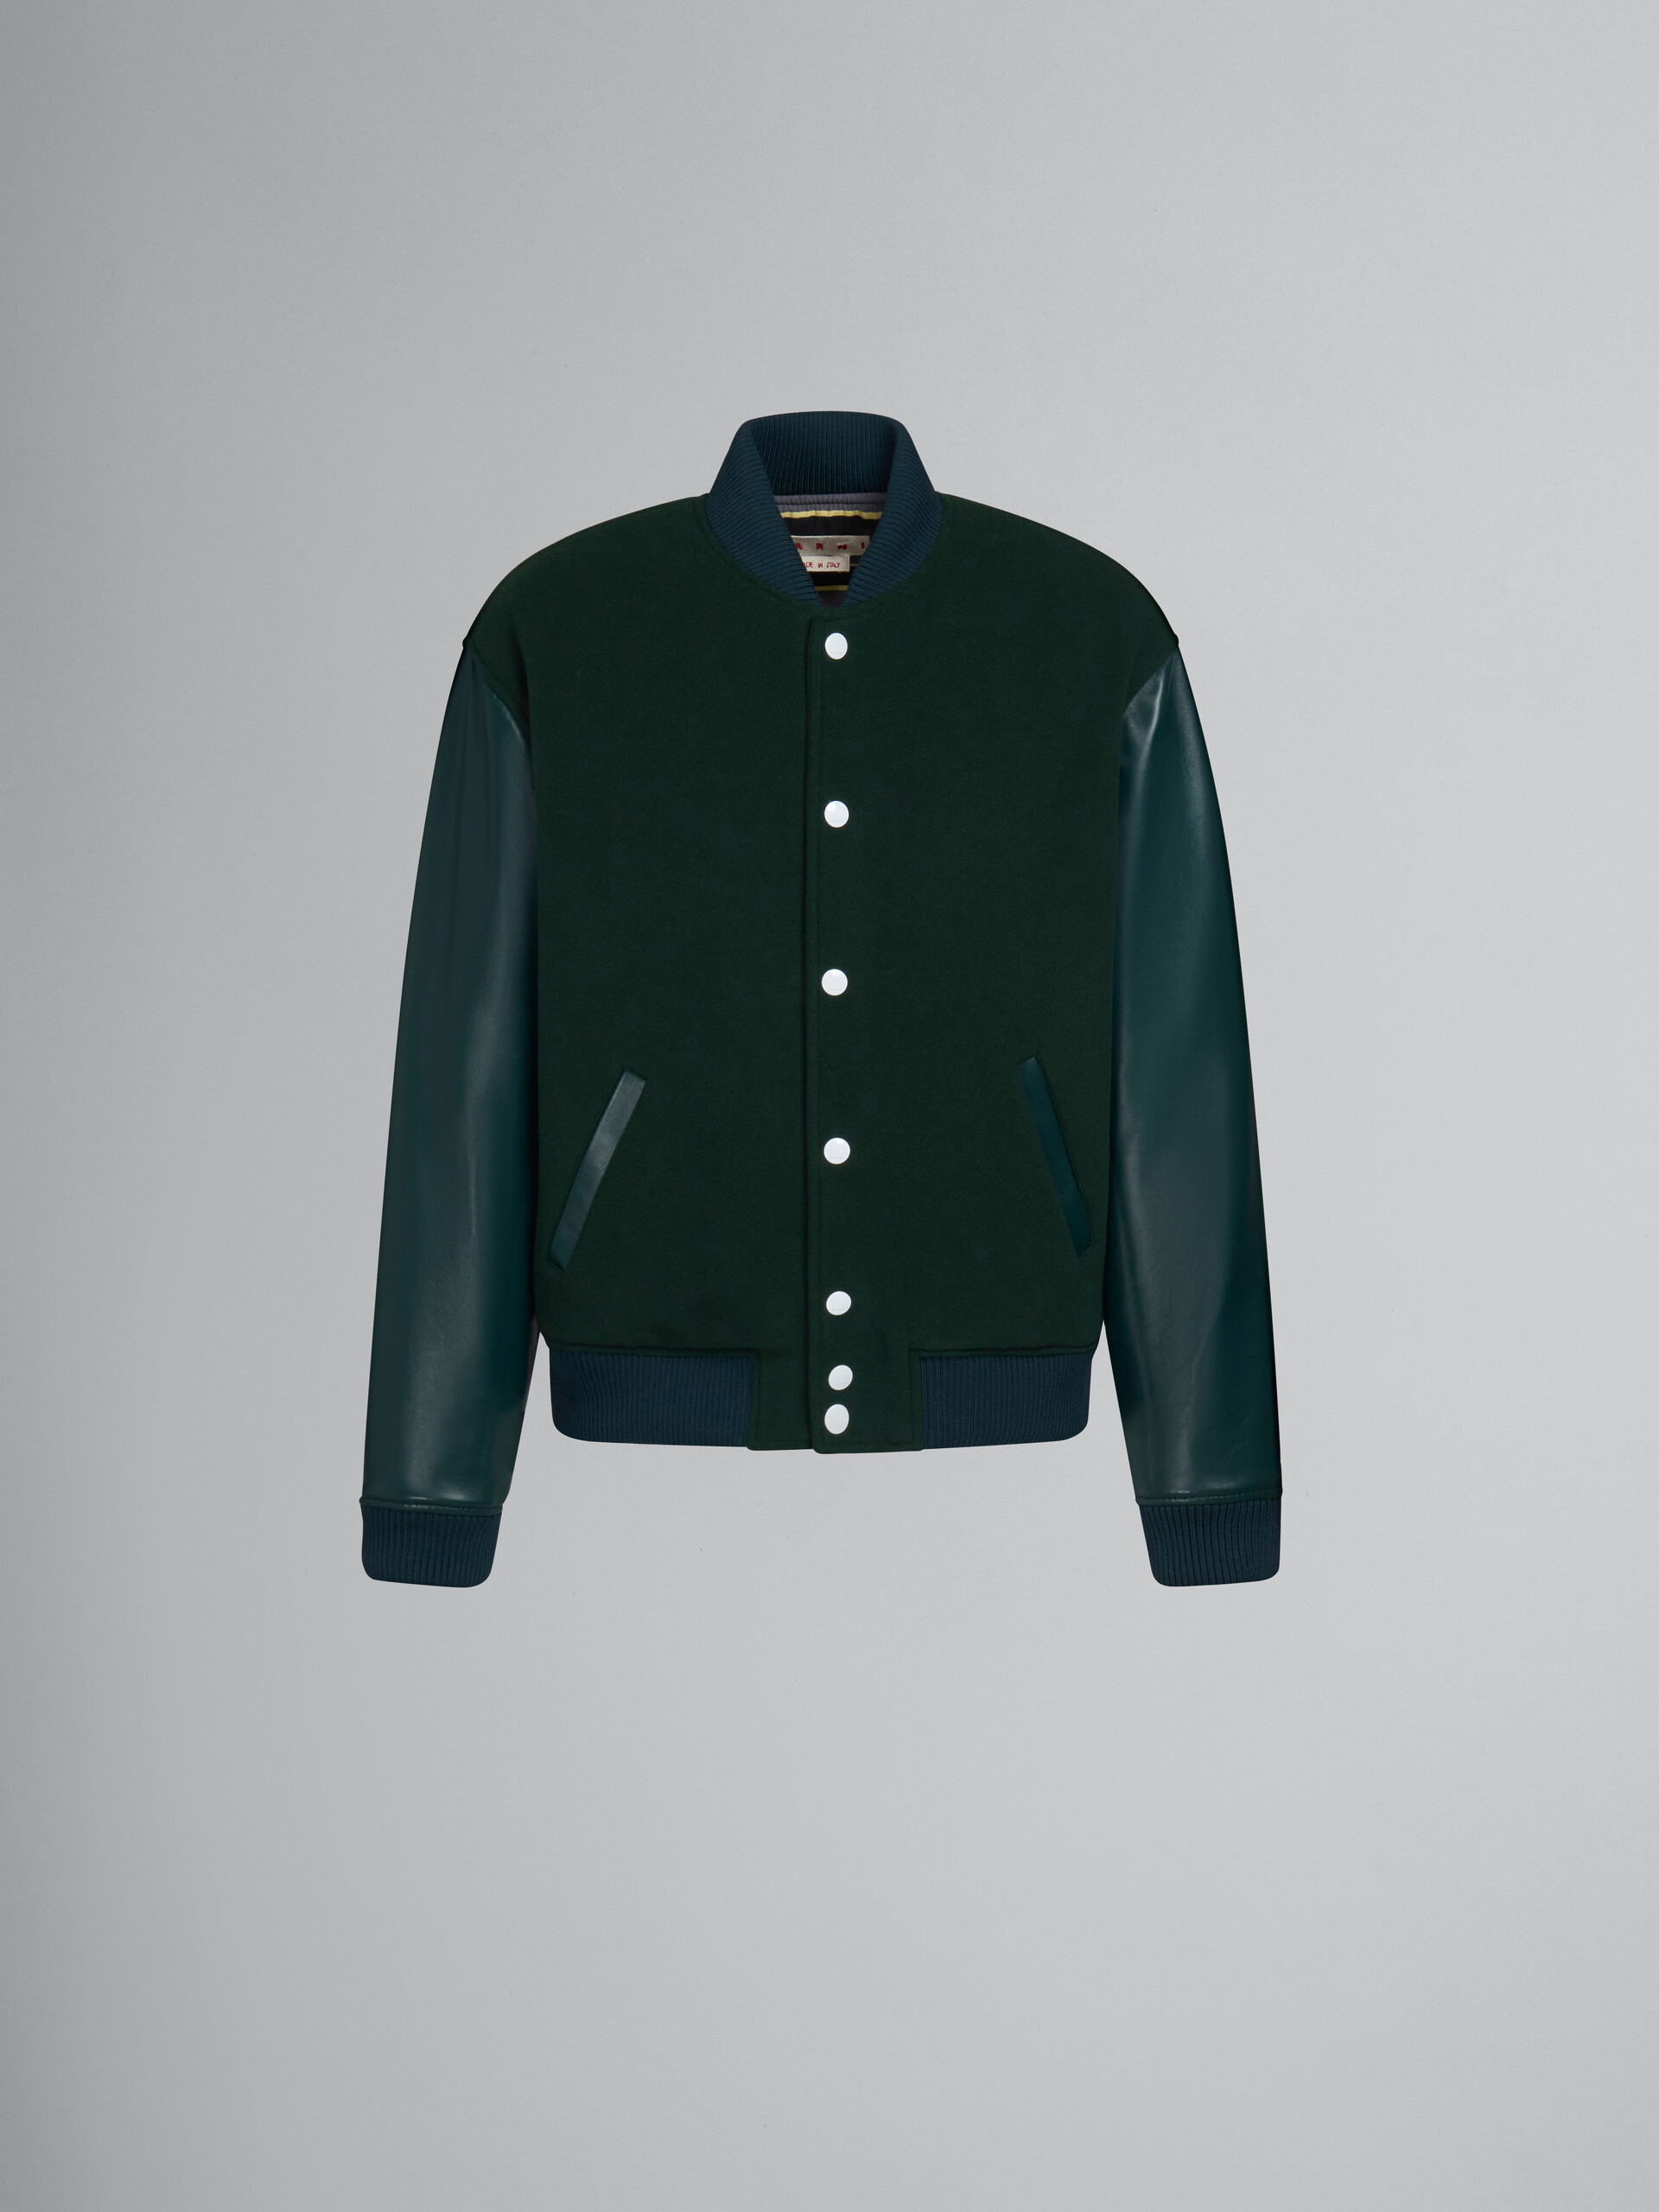 Green wool felt bomber with leather sleeves - Jackets - Image 1